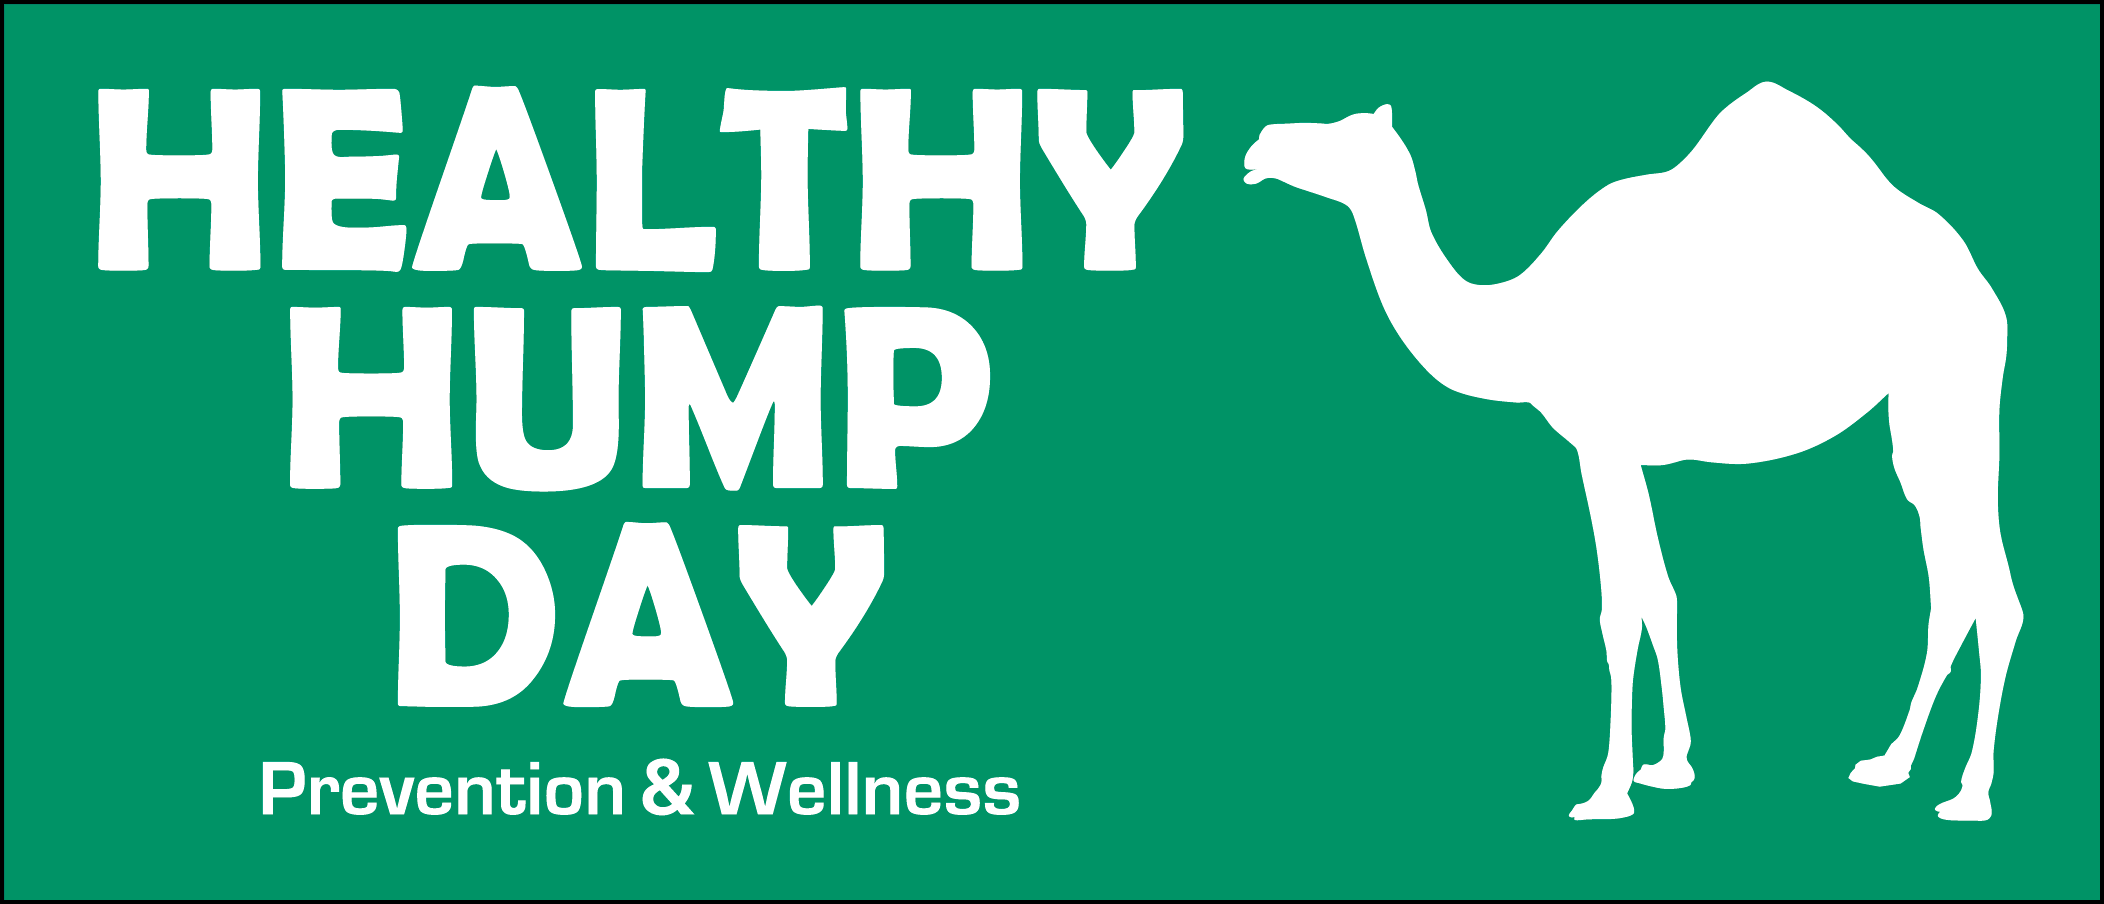 Healthy Hump Day Prevention & Wellness